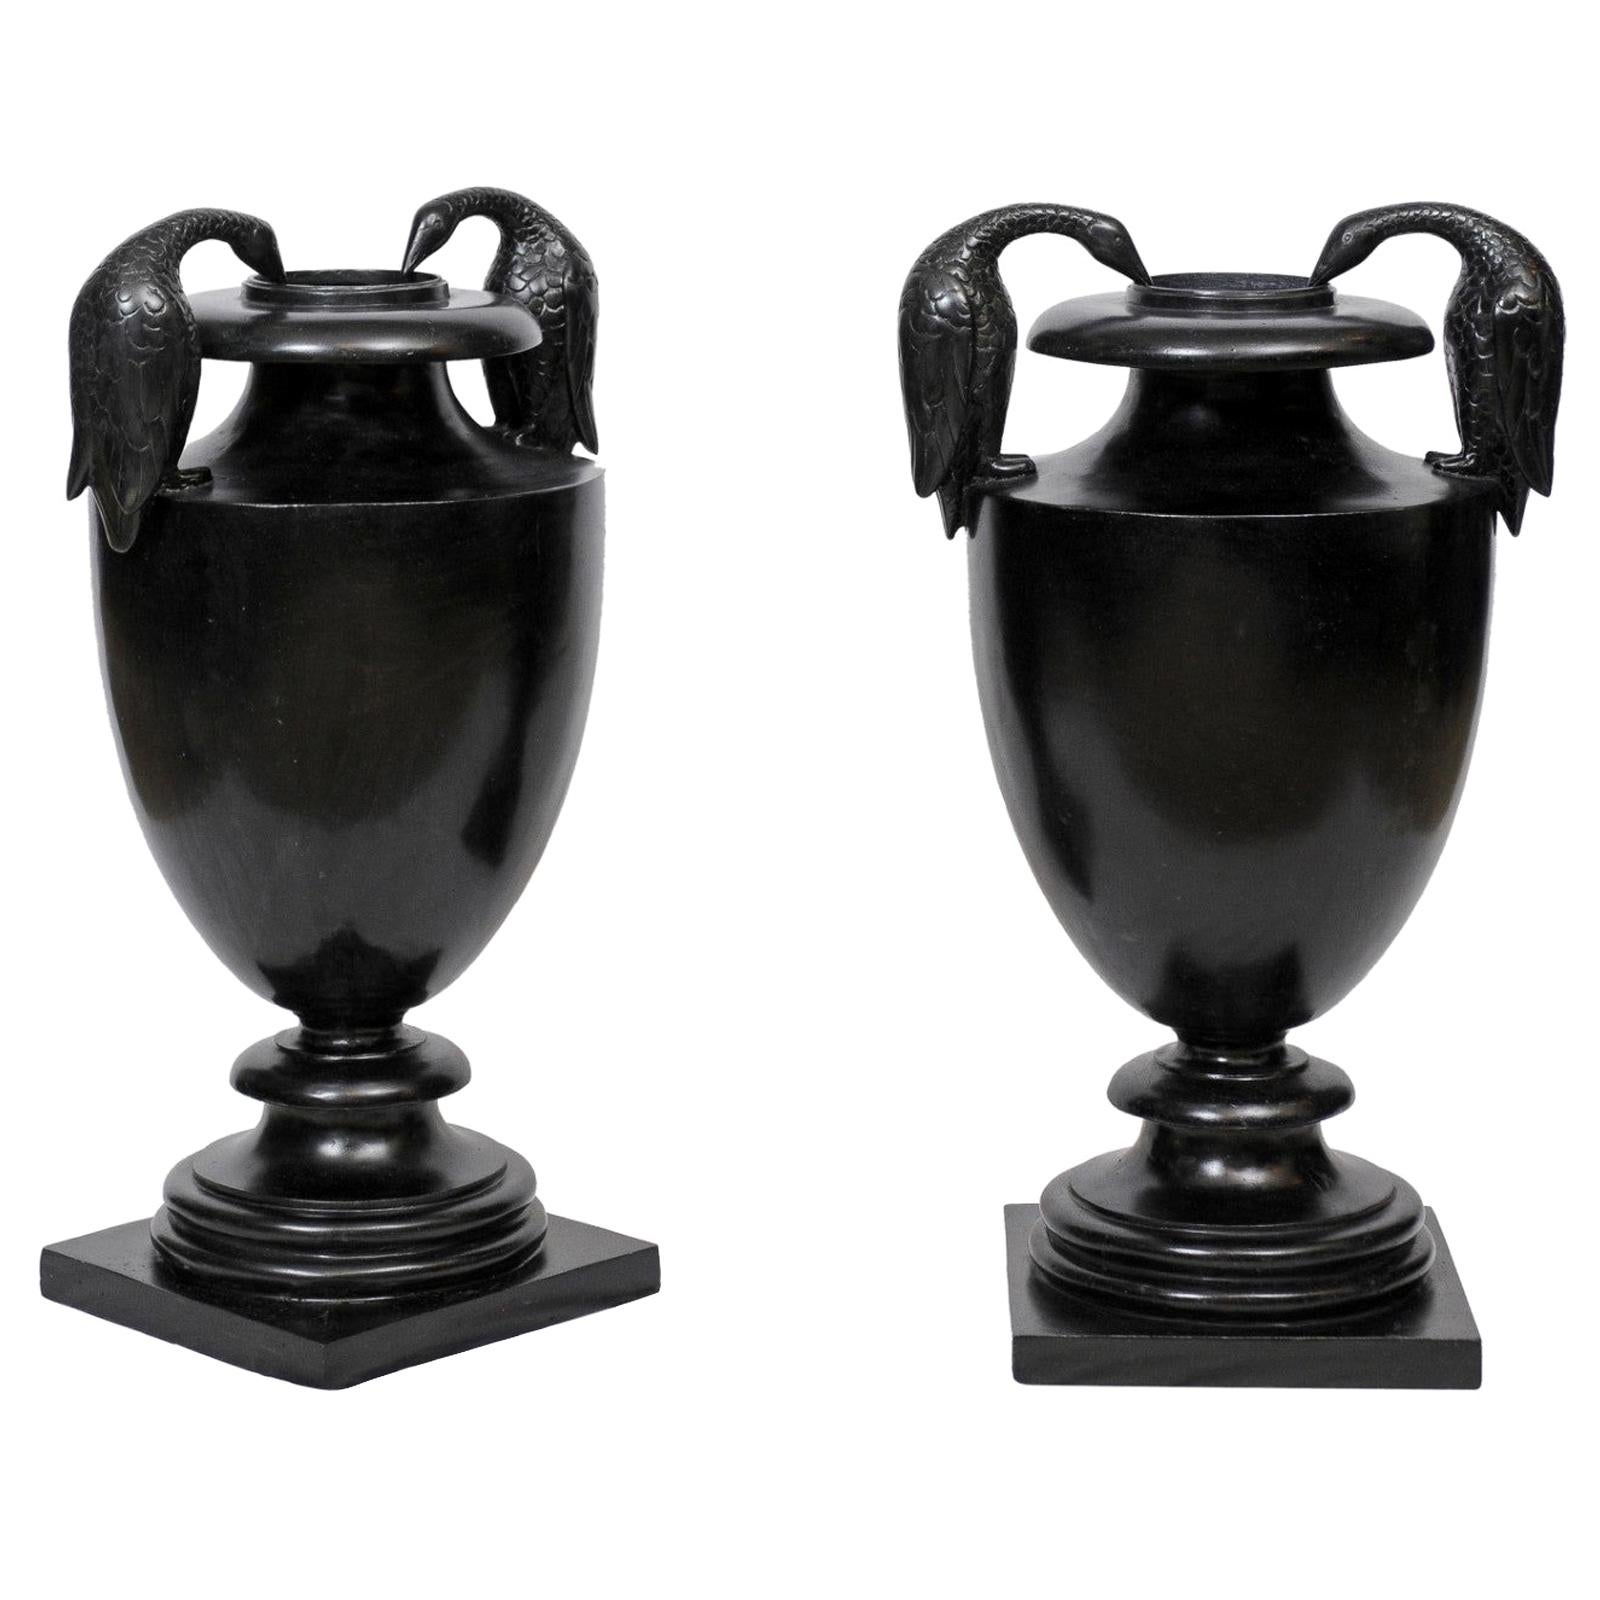 Classical Urn with Cormorant Handles Cast in Black Wax Stone